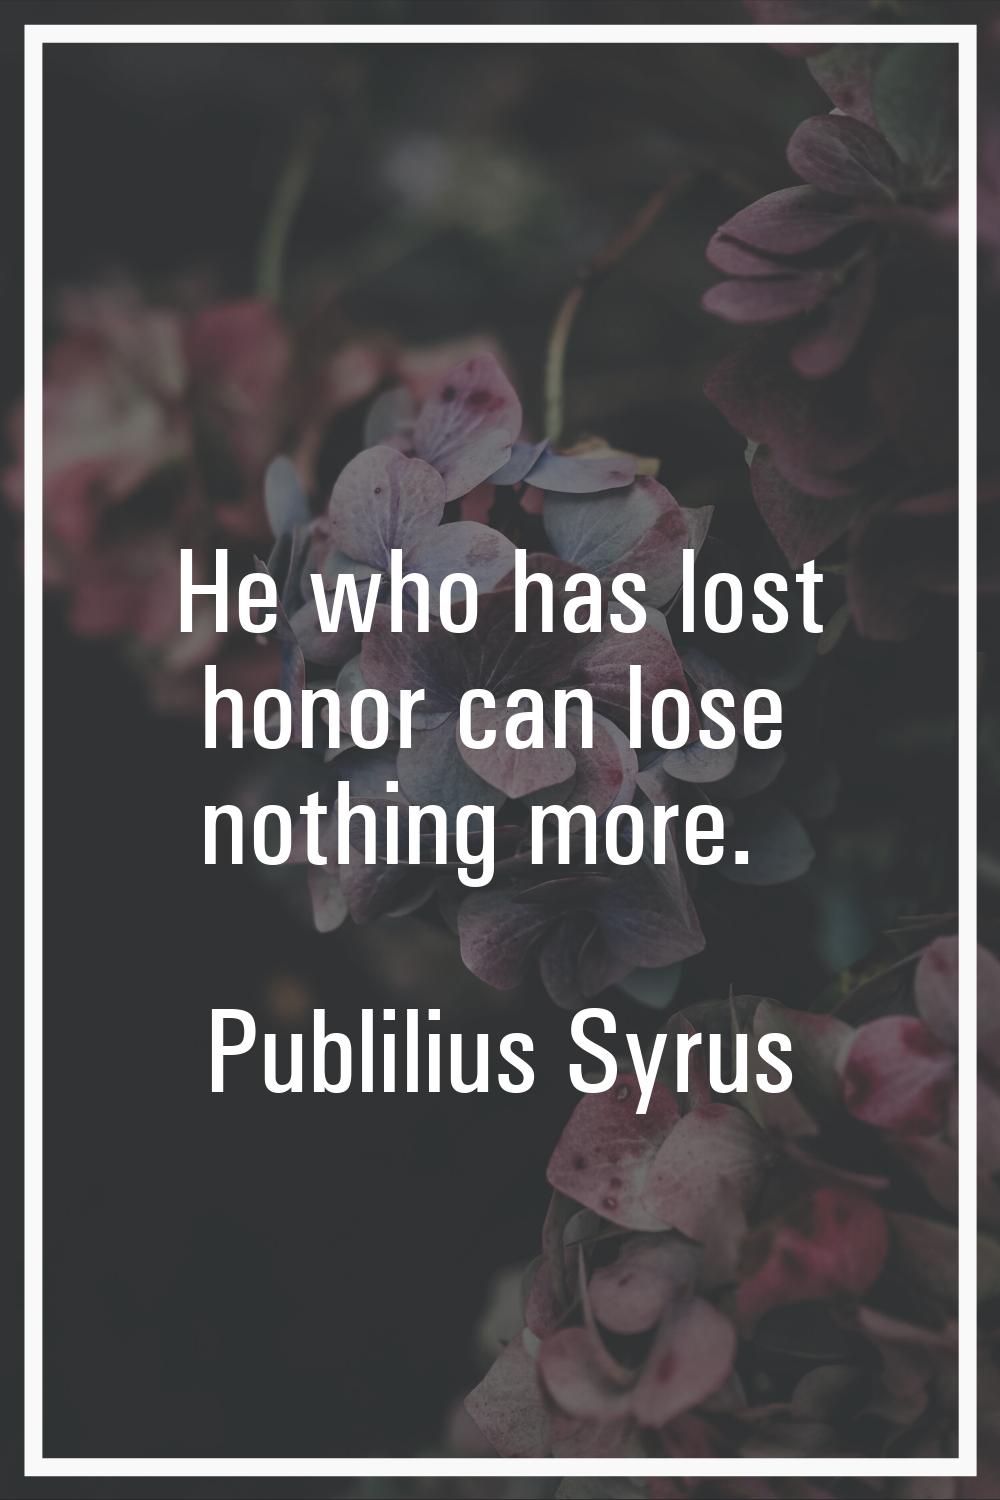 He who has lost honor can lose nothing more.